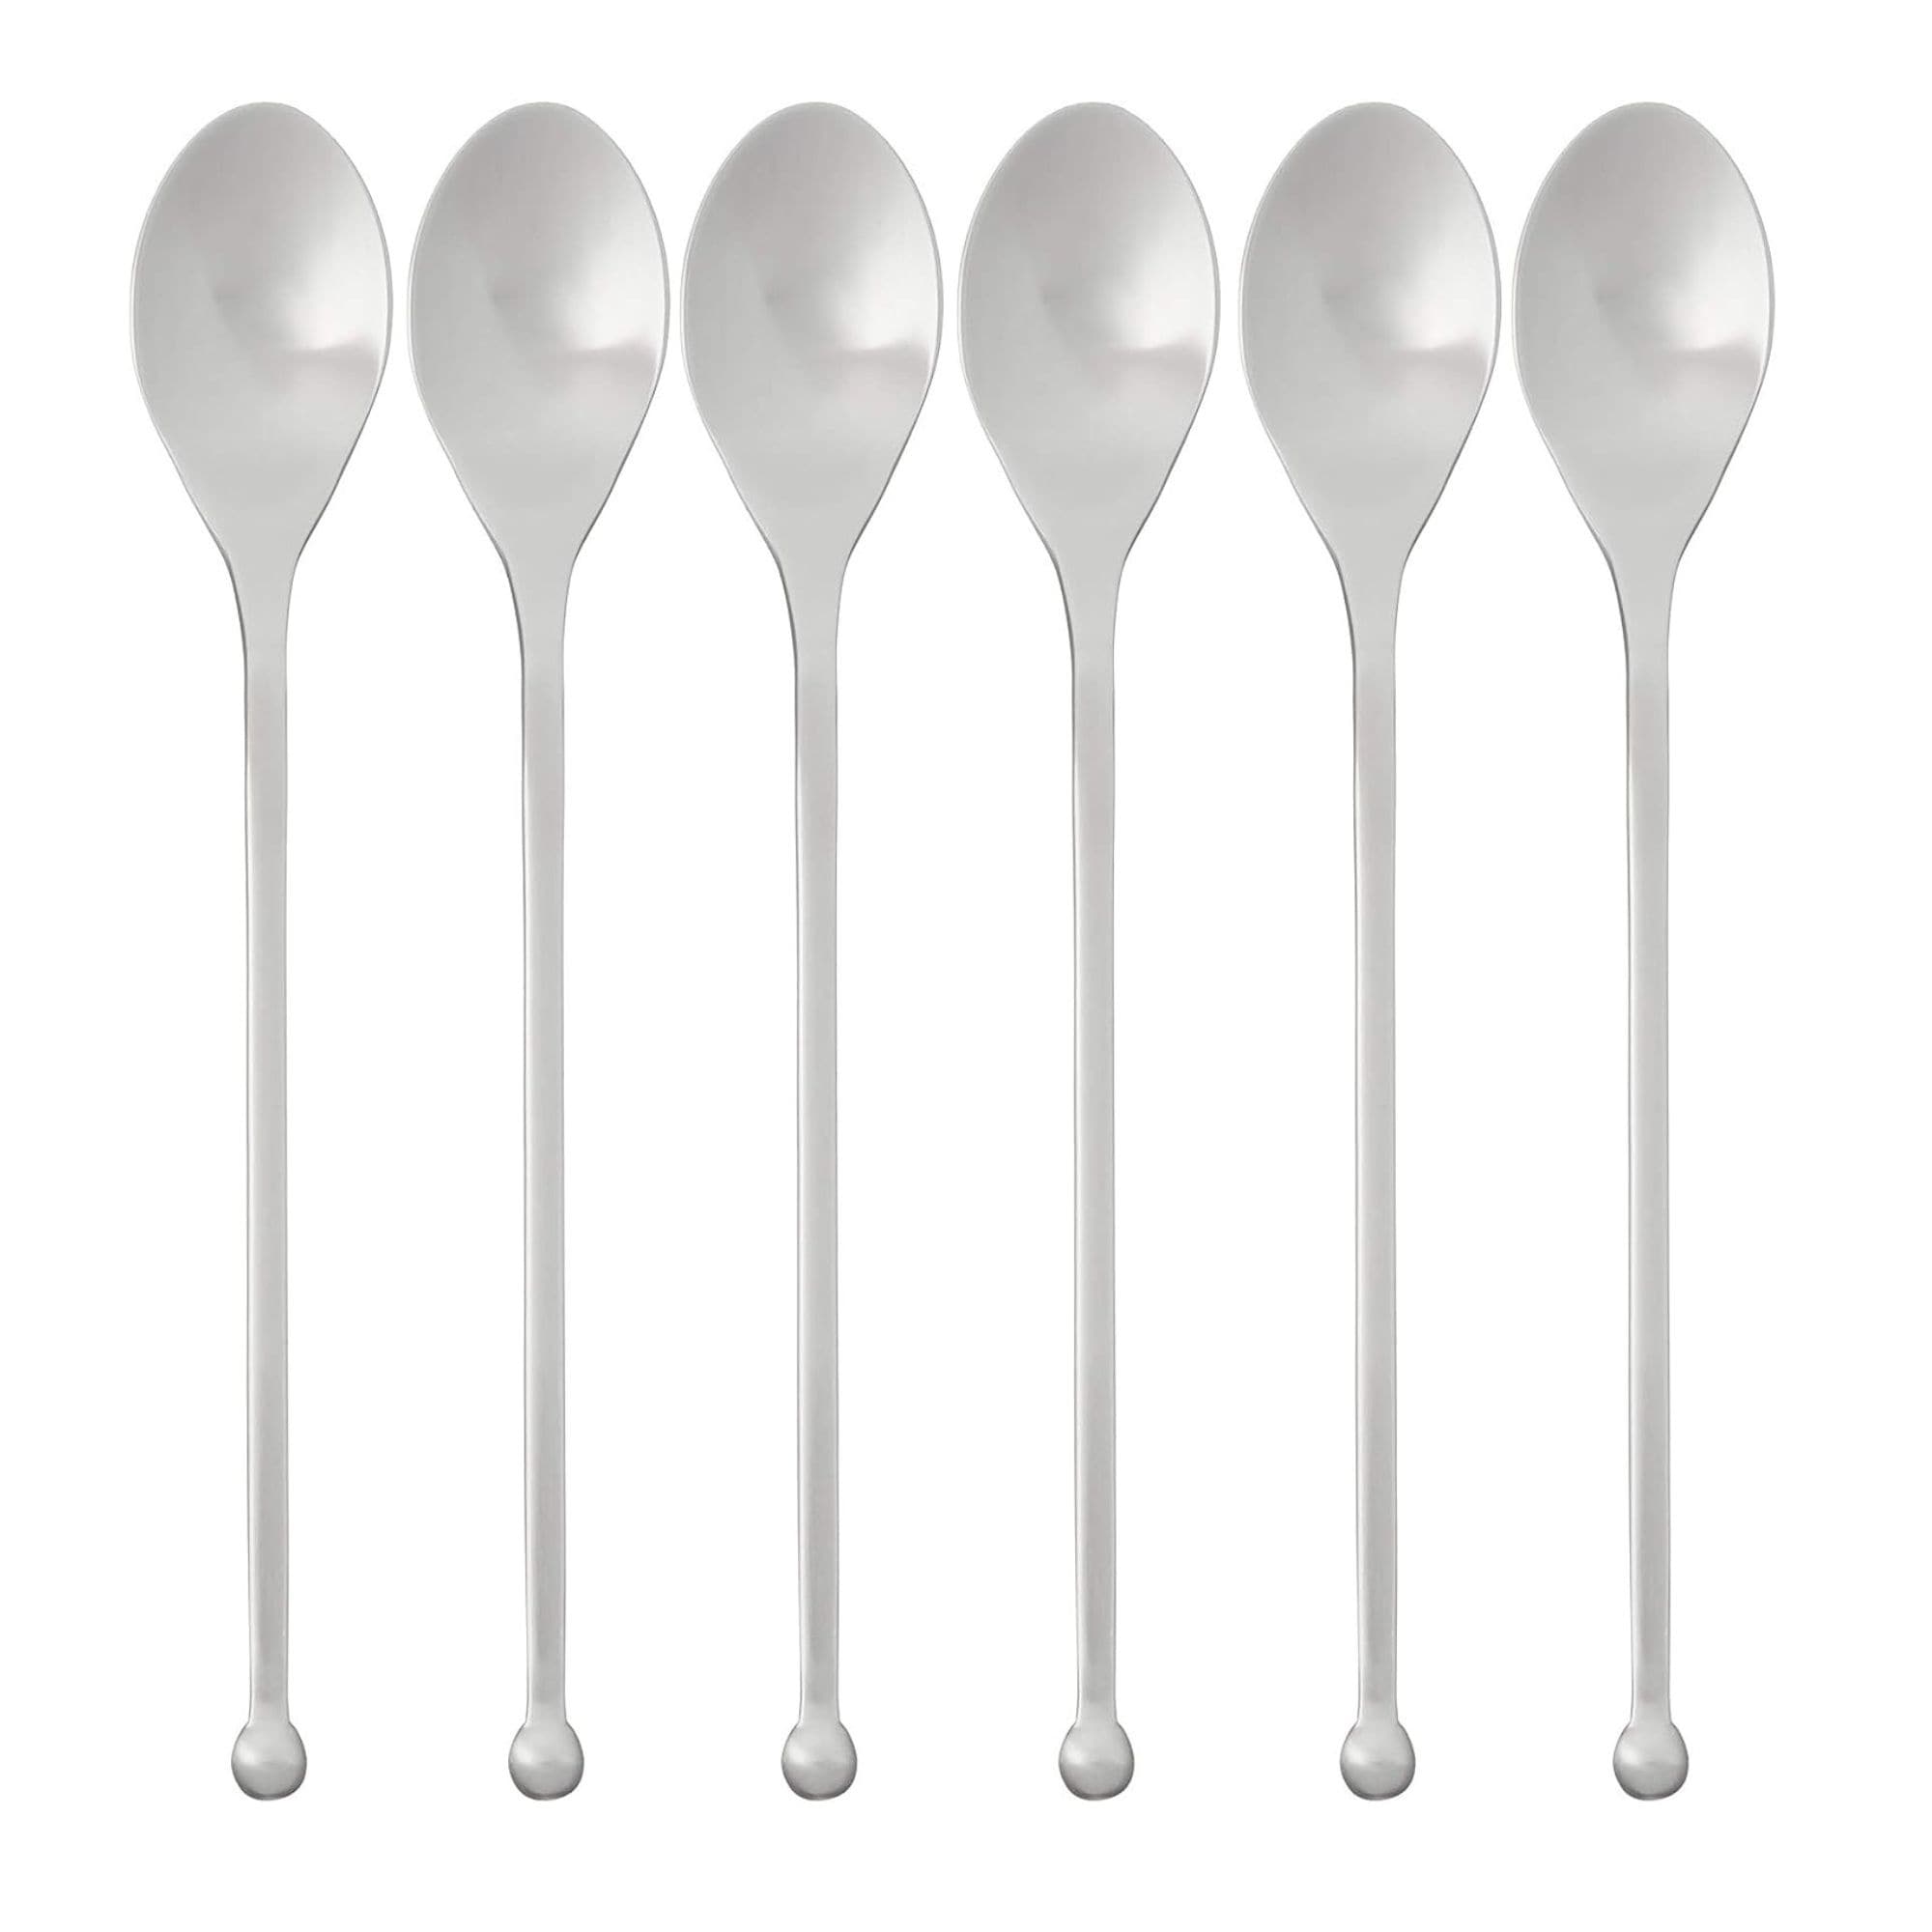 https://ak1.ostkcdn.com/images/products/is/images/direct/da8a8f7feebb80062a7db0671a080c921e0a7f6e/Knork-Original-Long-Handle-Iced-Tea-Spoon%2C-6-Piece-Set%2C-Matte-Finish.jpg